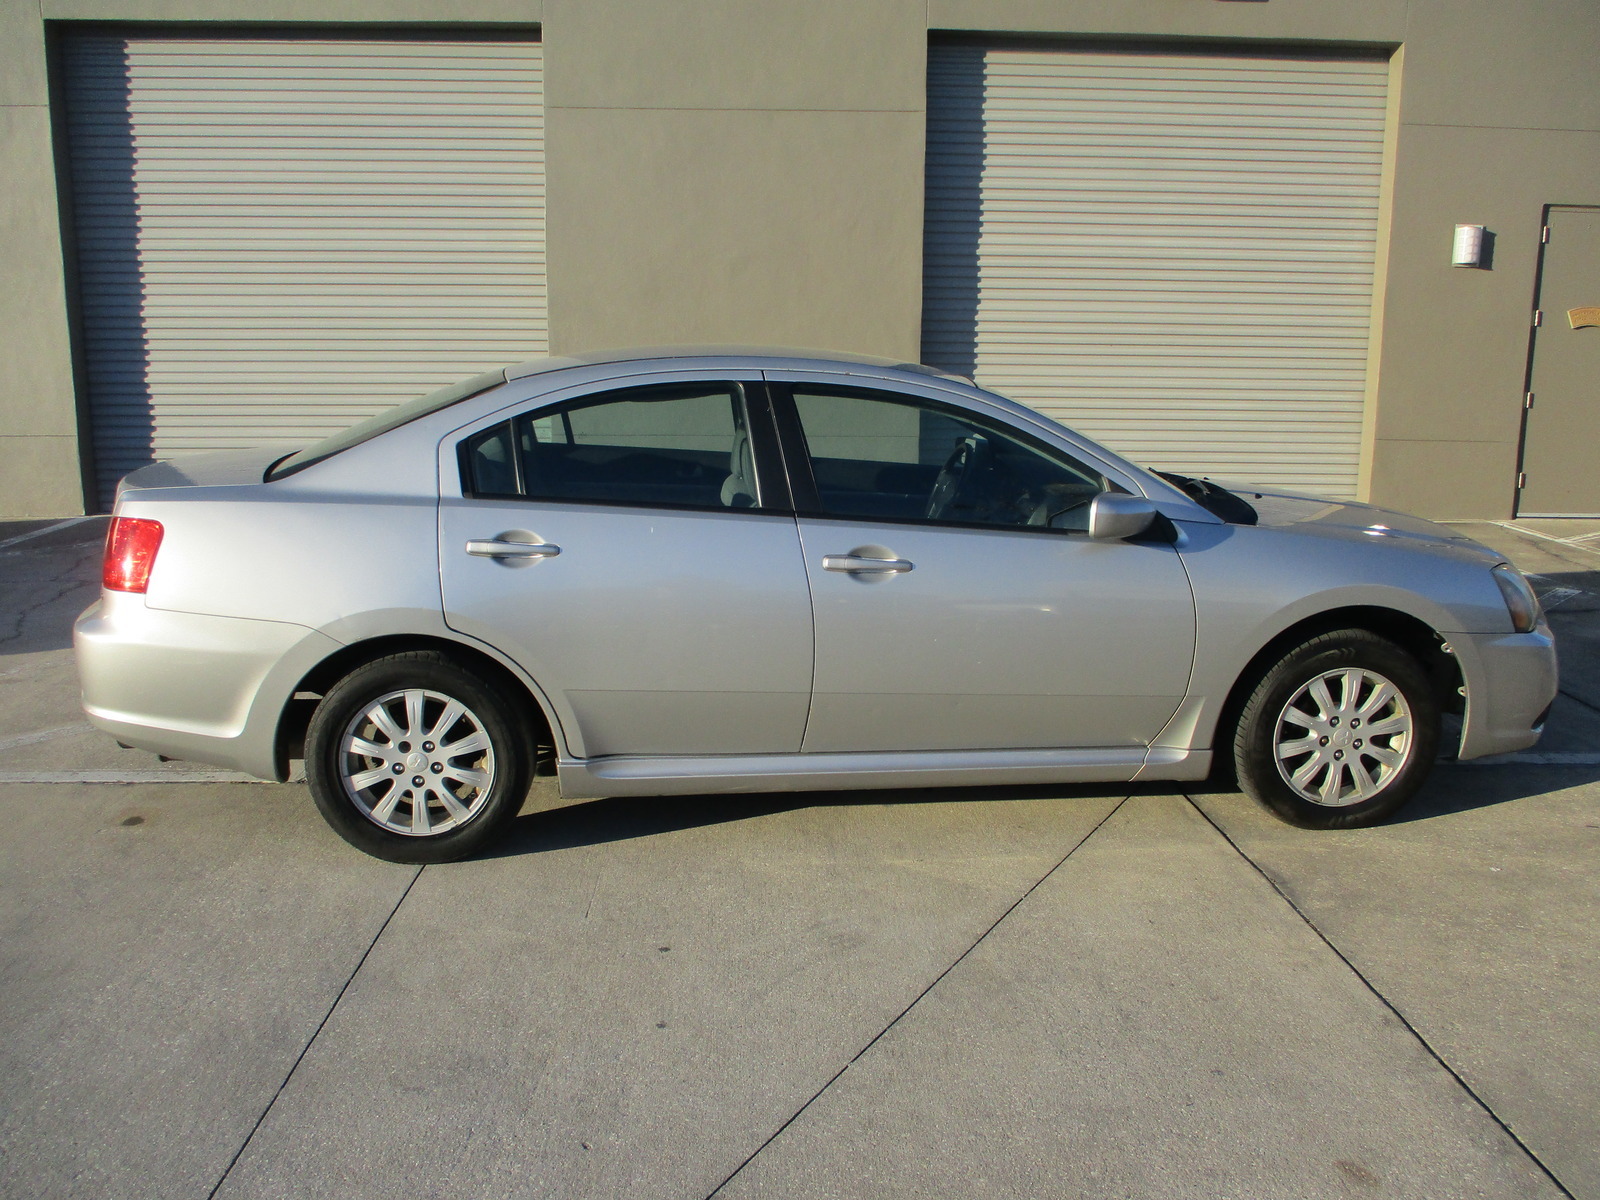 Used 2010 Mitsubishi Galant for Sale Right Now - Autotrader